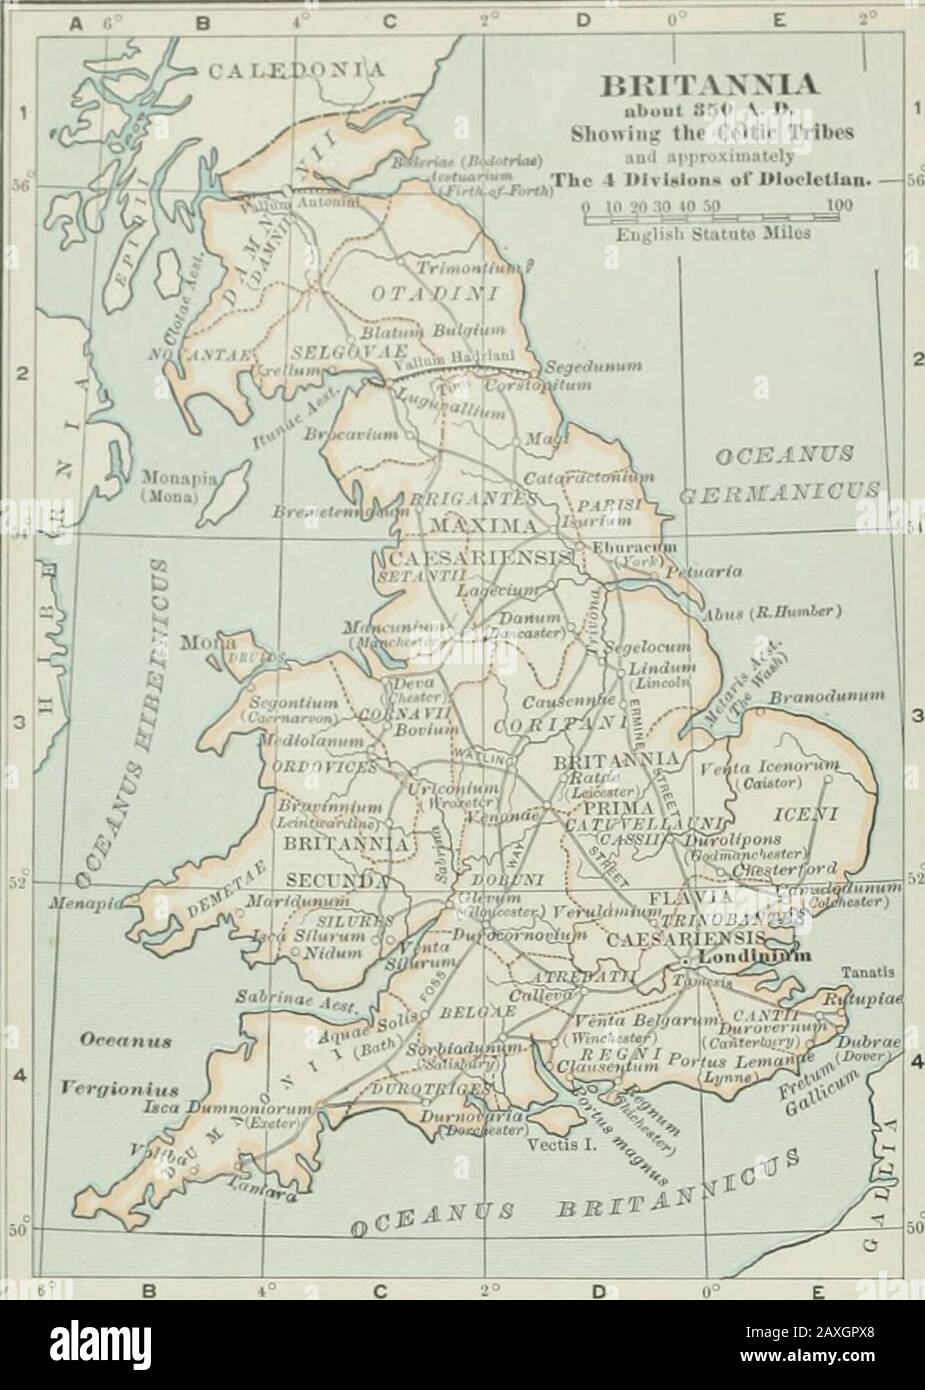 The century dictionary and cyclopedia, a work of universal reference in all departments of knowledge with a new atlas of the world . Pif.inbufff POLAND KiKult of the Third Piirtilioii.795. Boundary of Poland Iroui 17;3 to 17.l-&gt; —- The Lands aoquired by Russia, Irui^sia and Auslrluarc colored like the ruHpeotive countries. - 0 M 100 200 300 English Statute Miles NO. A.M. BRITANXIA ubuiil ».-•(&gt; A. I&gt;. Slioniiii; tlip Celtic Tribos. r-r.^.The 4 UlvtslonK of UlooleUun.. ENGLISH CONQUEST 150 to the End of the 0th Century, S)Ki»iD|: thtf Settlc-mouts of the JutcS,S:»xoiis ami Alleles. Als Stock Photo